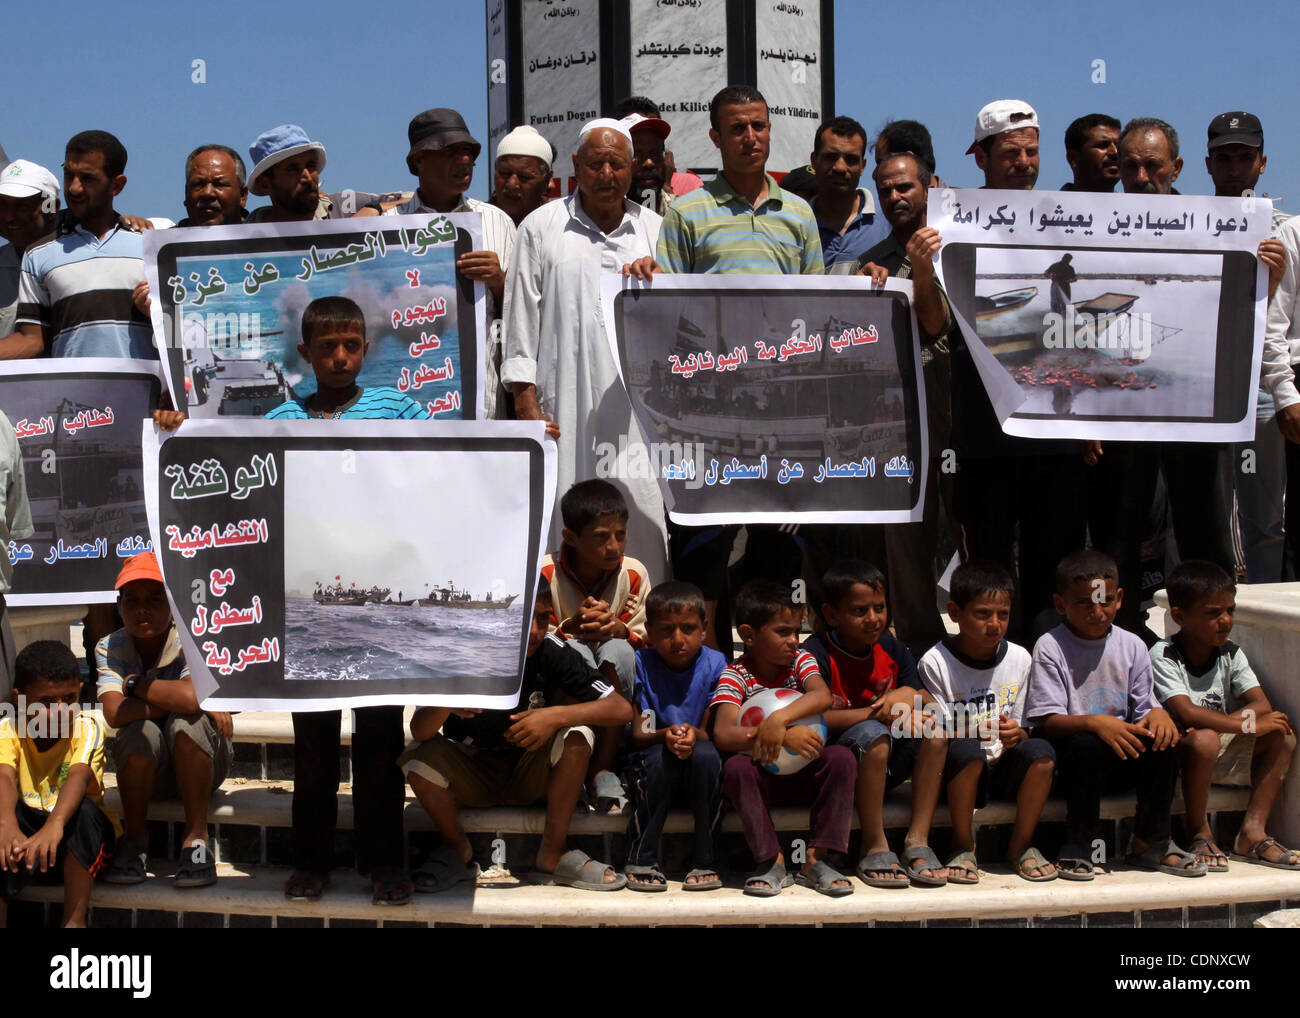 July 05, 2011 - Gaza City, Gaza Strip - Palestinian fishermen and children hold banners during a rally in Gaza City in support of the international Freedom Flotilla hoping to breach Israel's sea blockade on Gaza as it remained banned by Greece from setting sail. (Credit Image: © Mohammed Asad/apaima Stock Photo